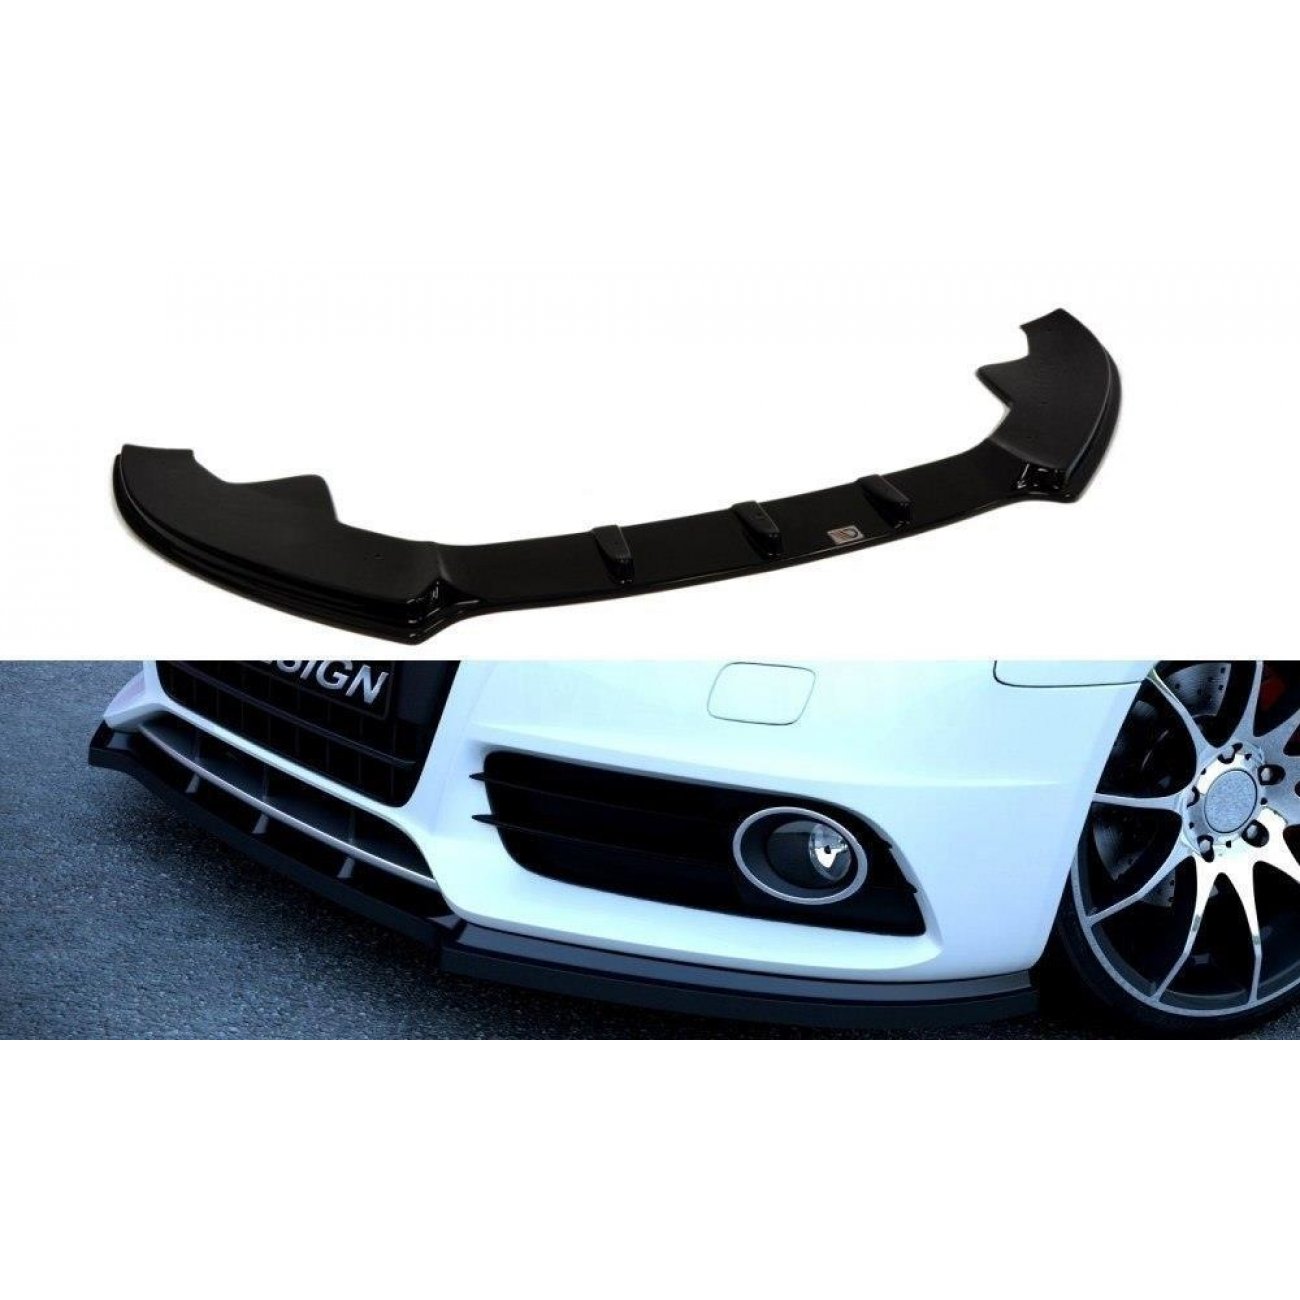 Rieger front bumper for Audi A4 S4 B8, B81 avant, Saloon before